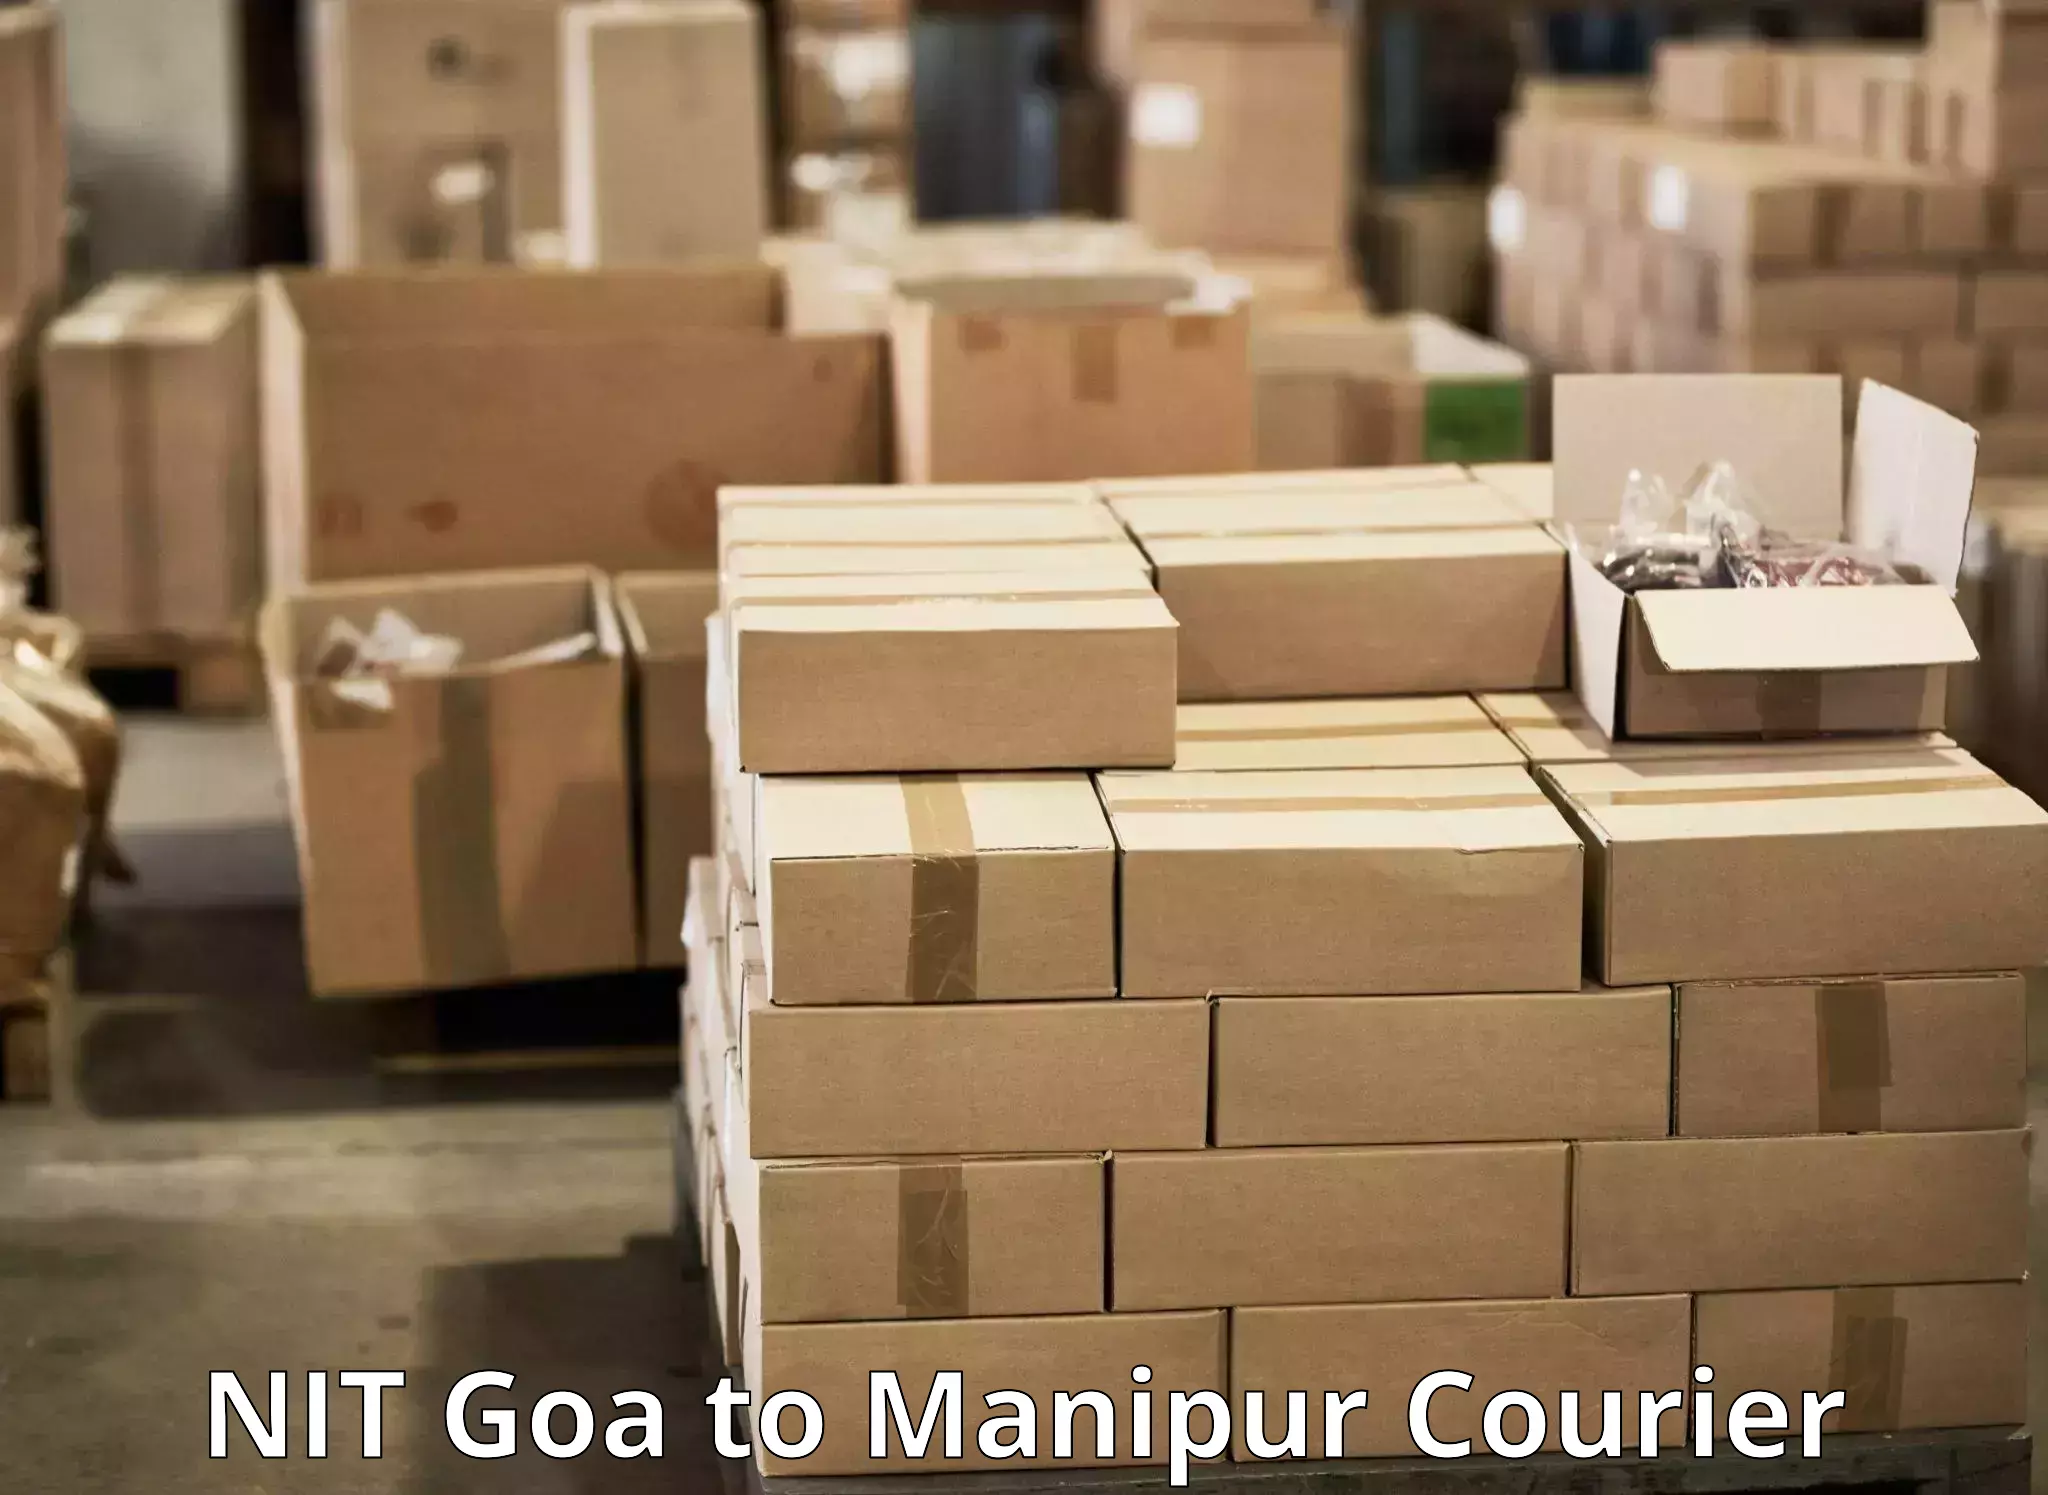 Courier app NIT Goa to Manipur